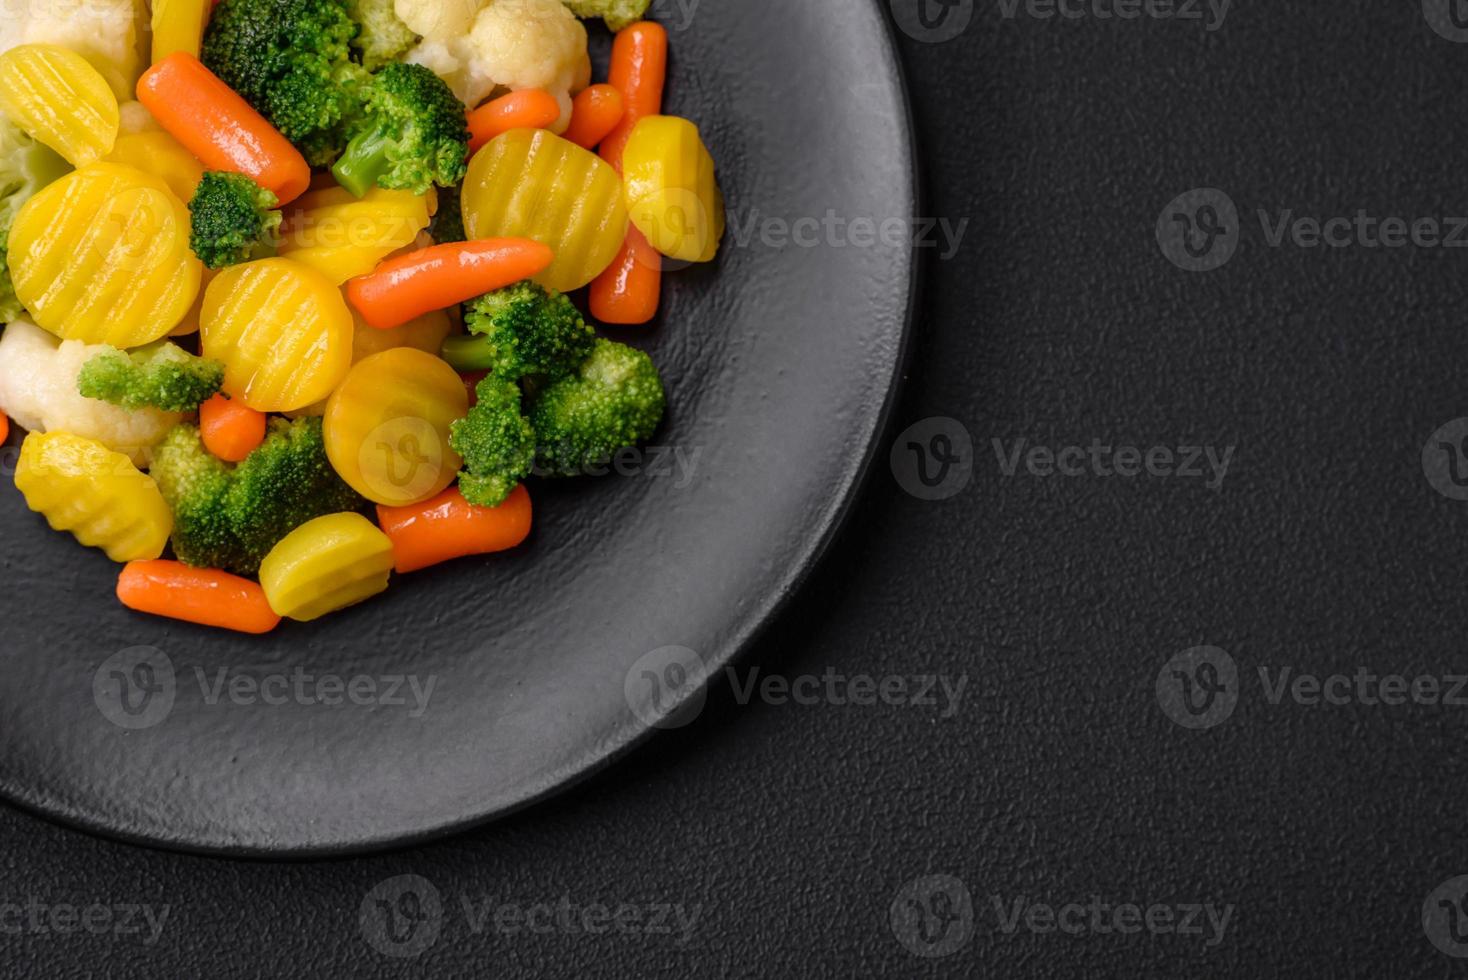 Delicious fresh vegetables steamed carrots, broccoli, cauliflower on a black plate photo